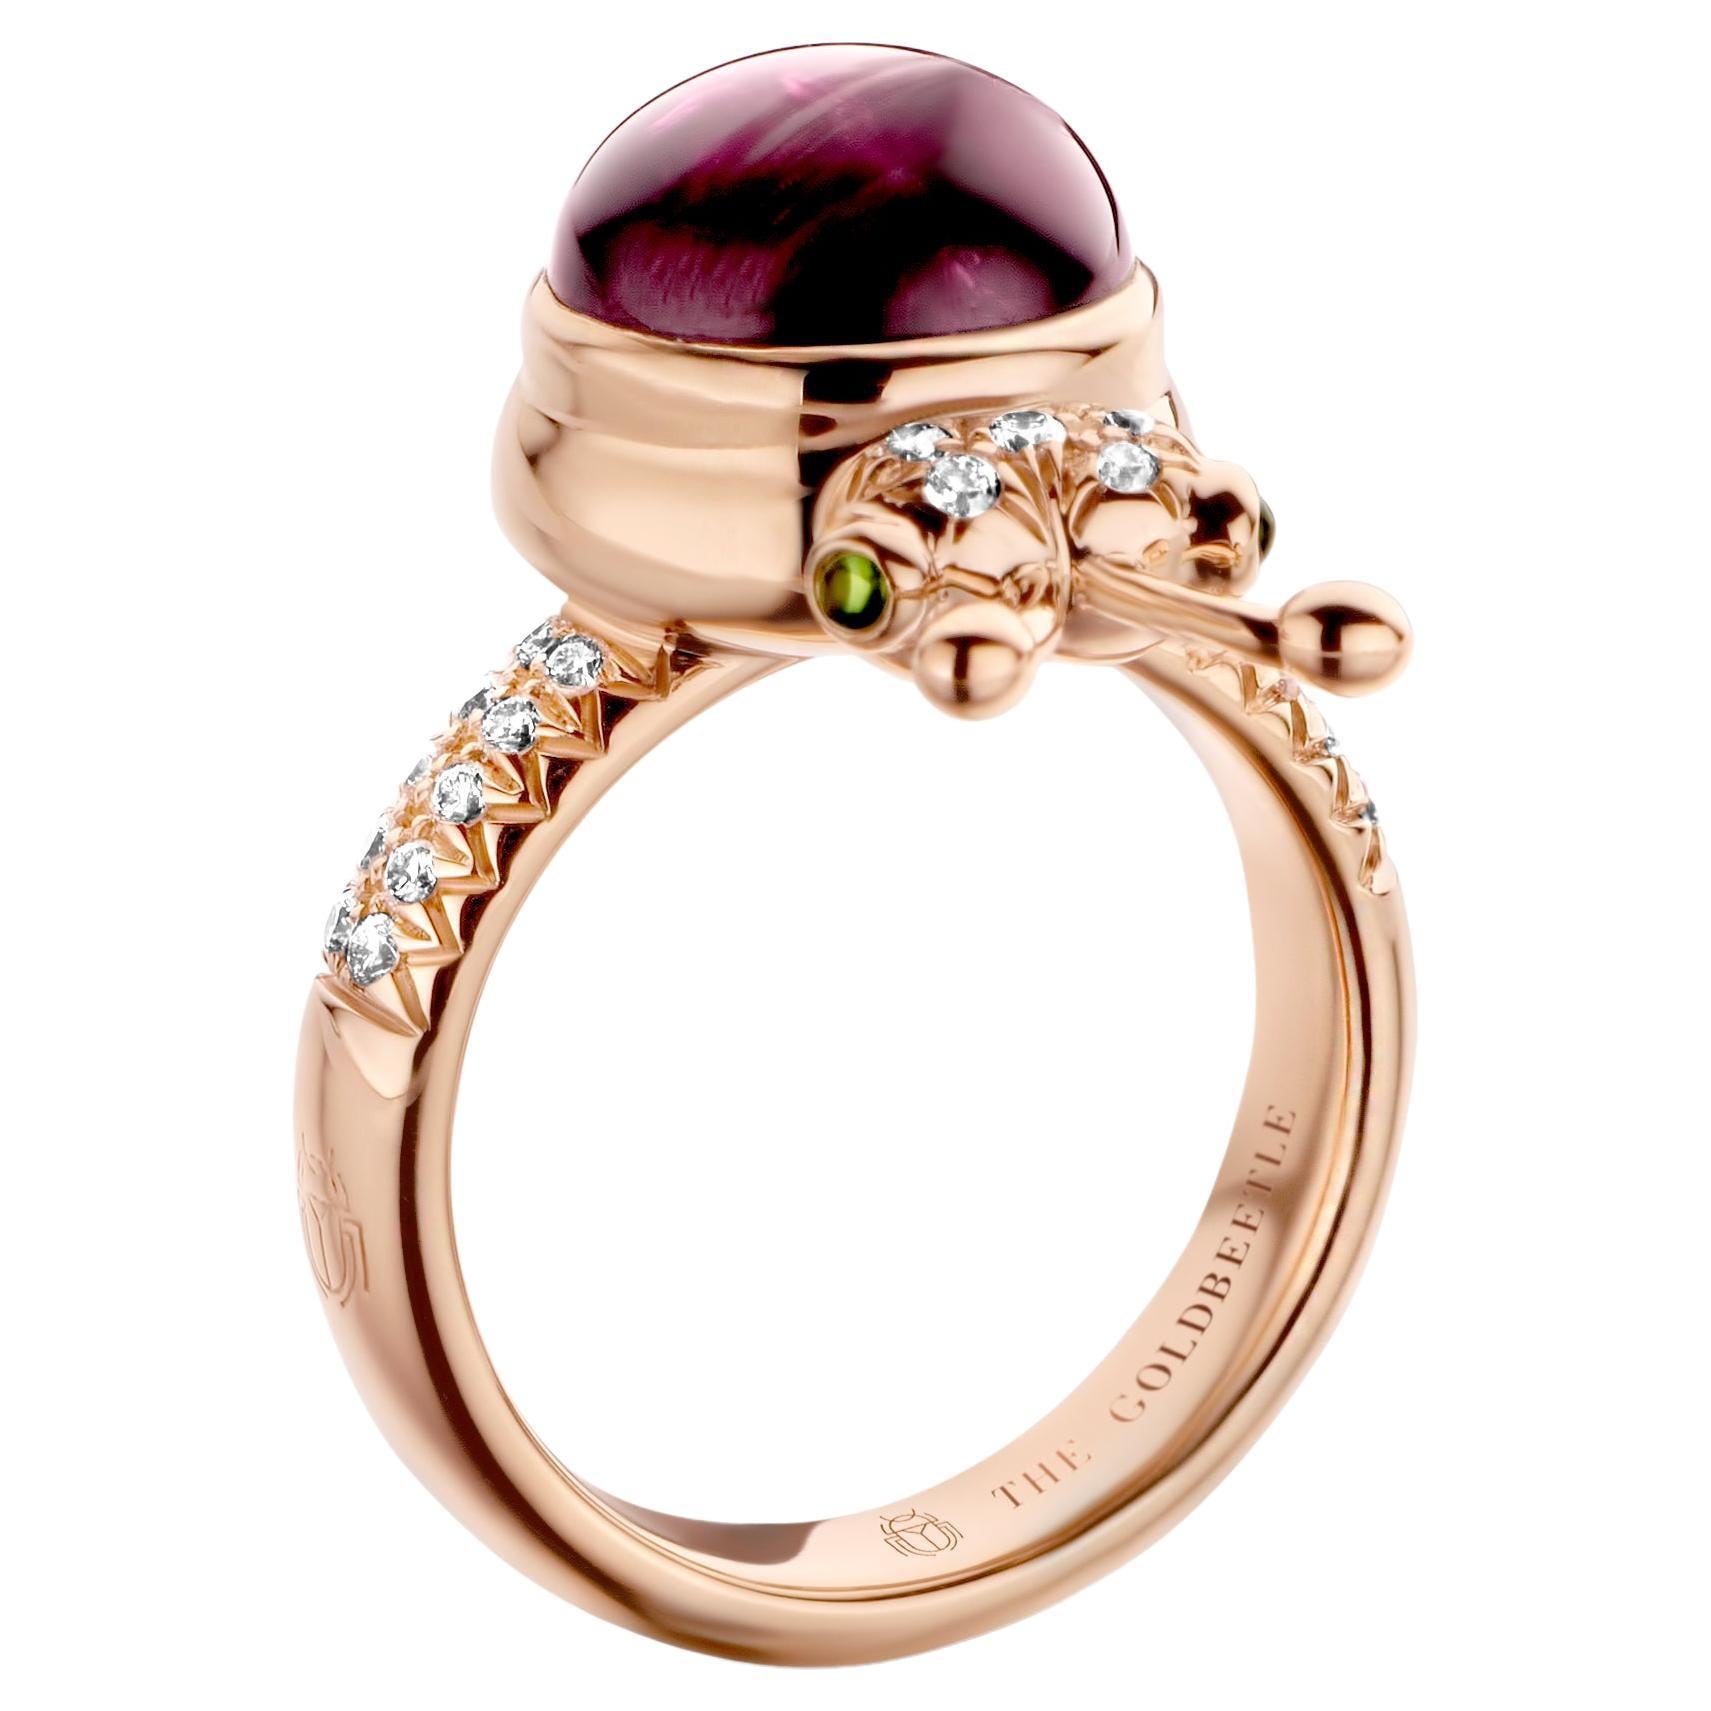 One-of-a-kind lucky beetle ring in 18 Karat rose gold 10g set with the finest natural diamonds in brilliant cut 0,23 Carat (VVS/DEF quality) one natural, rhodolite garnet in round cabochon cut 6,00 Carat and two tsavorites in round cabochon cut.